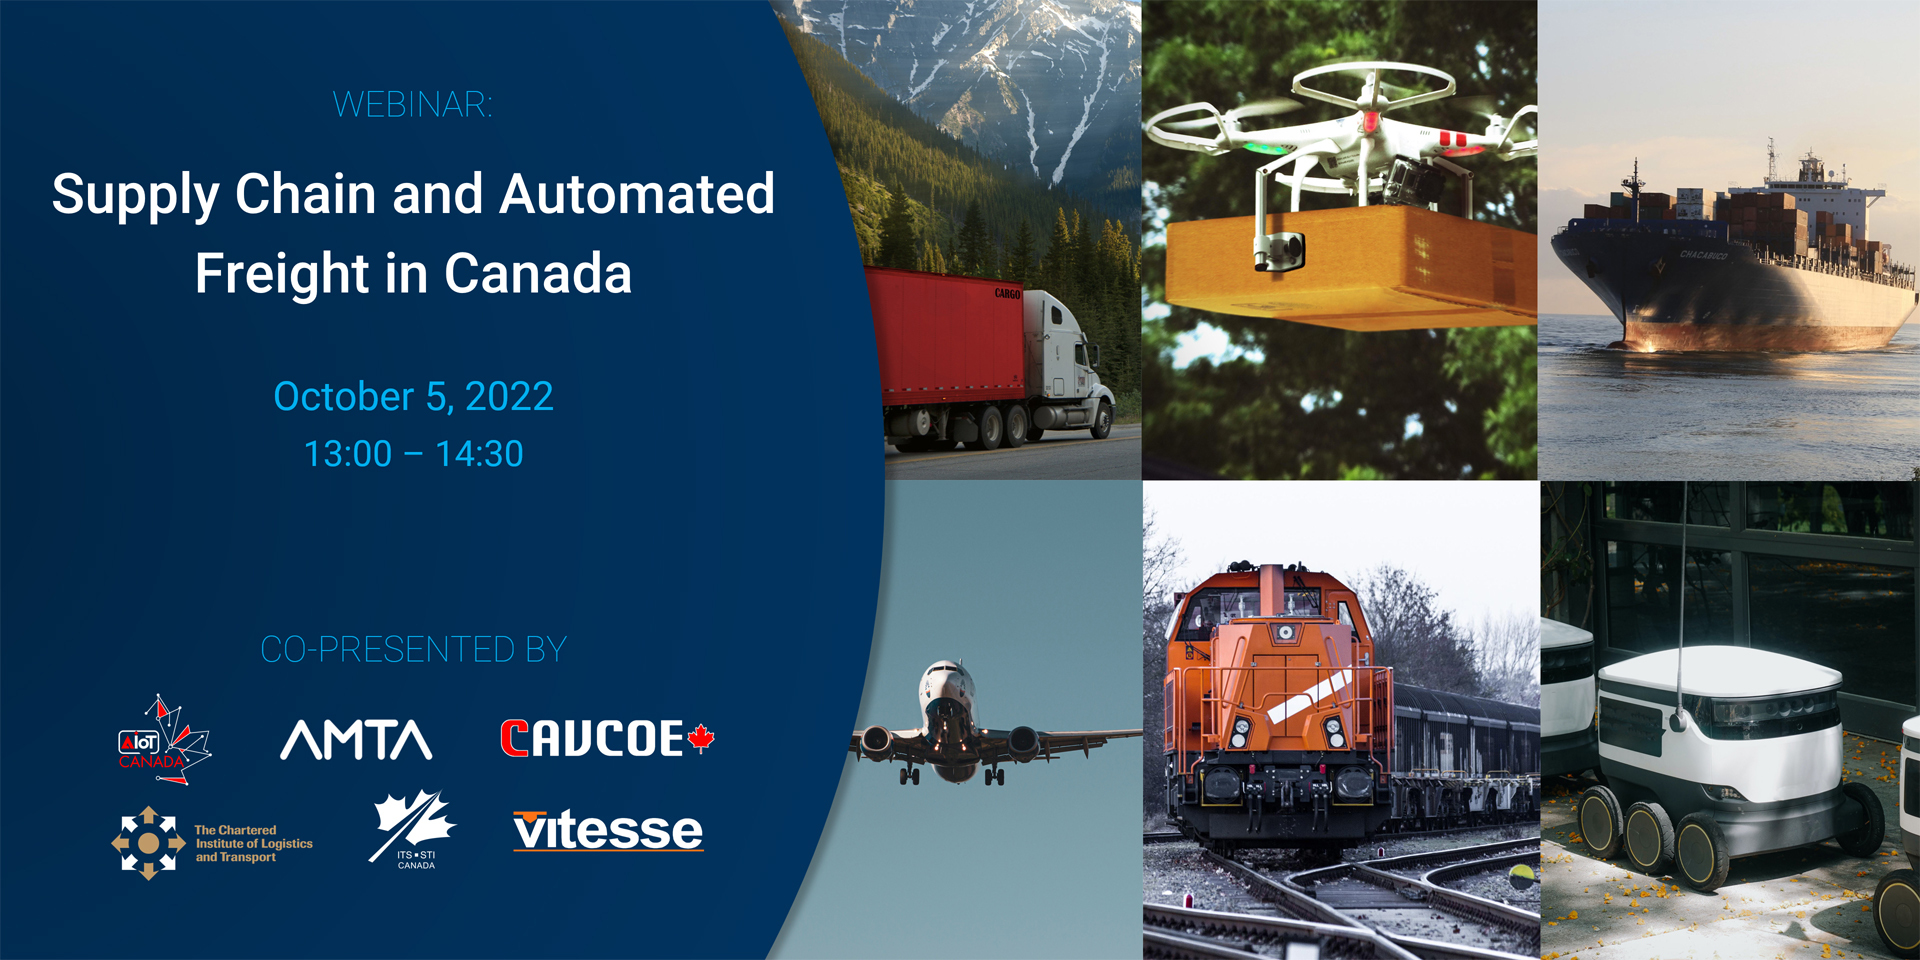 Webinar Event Automated Freight in Canada